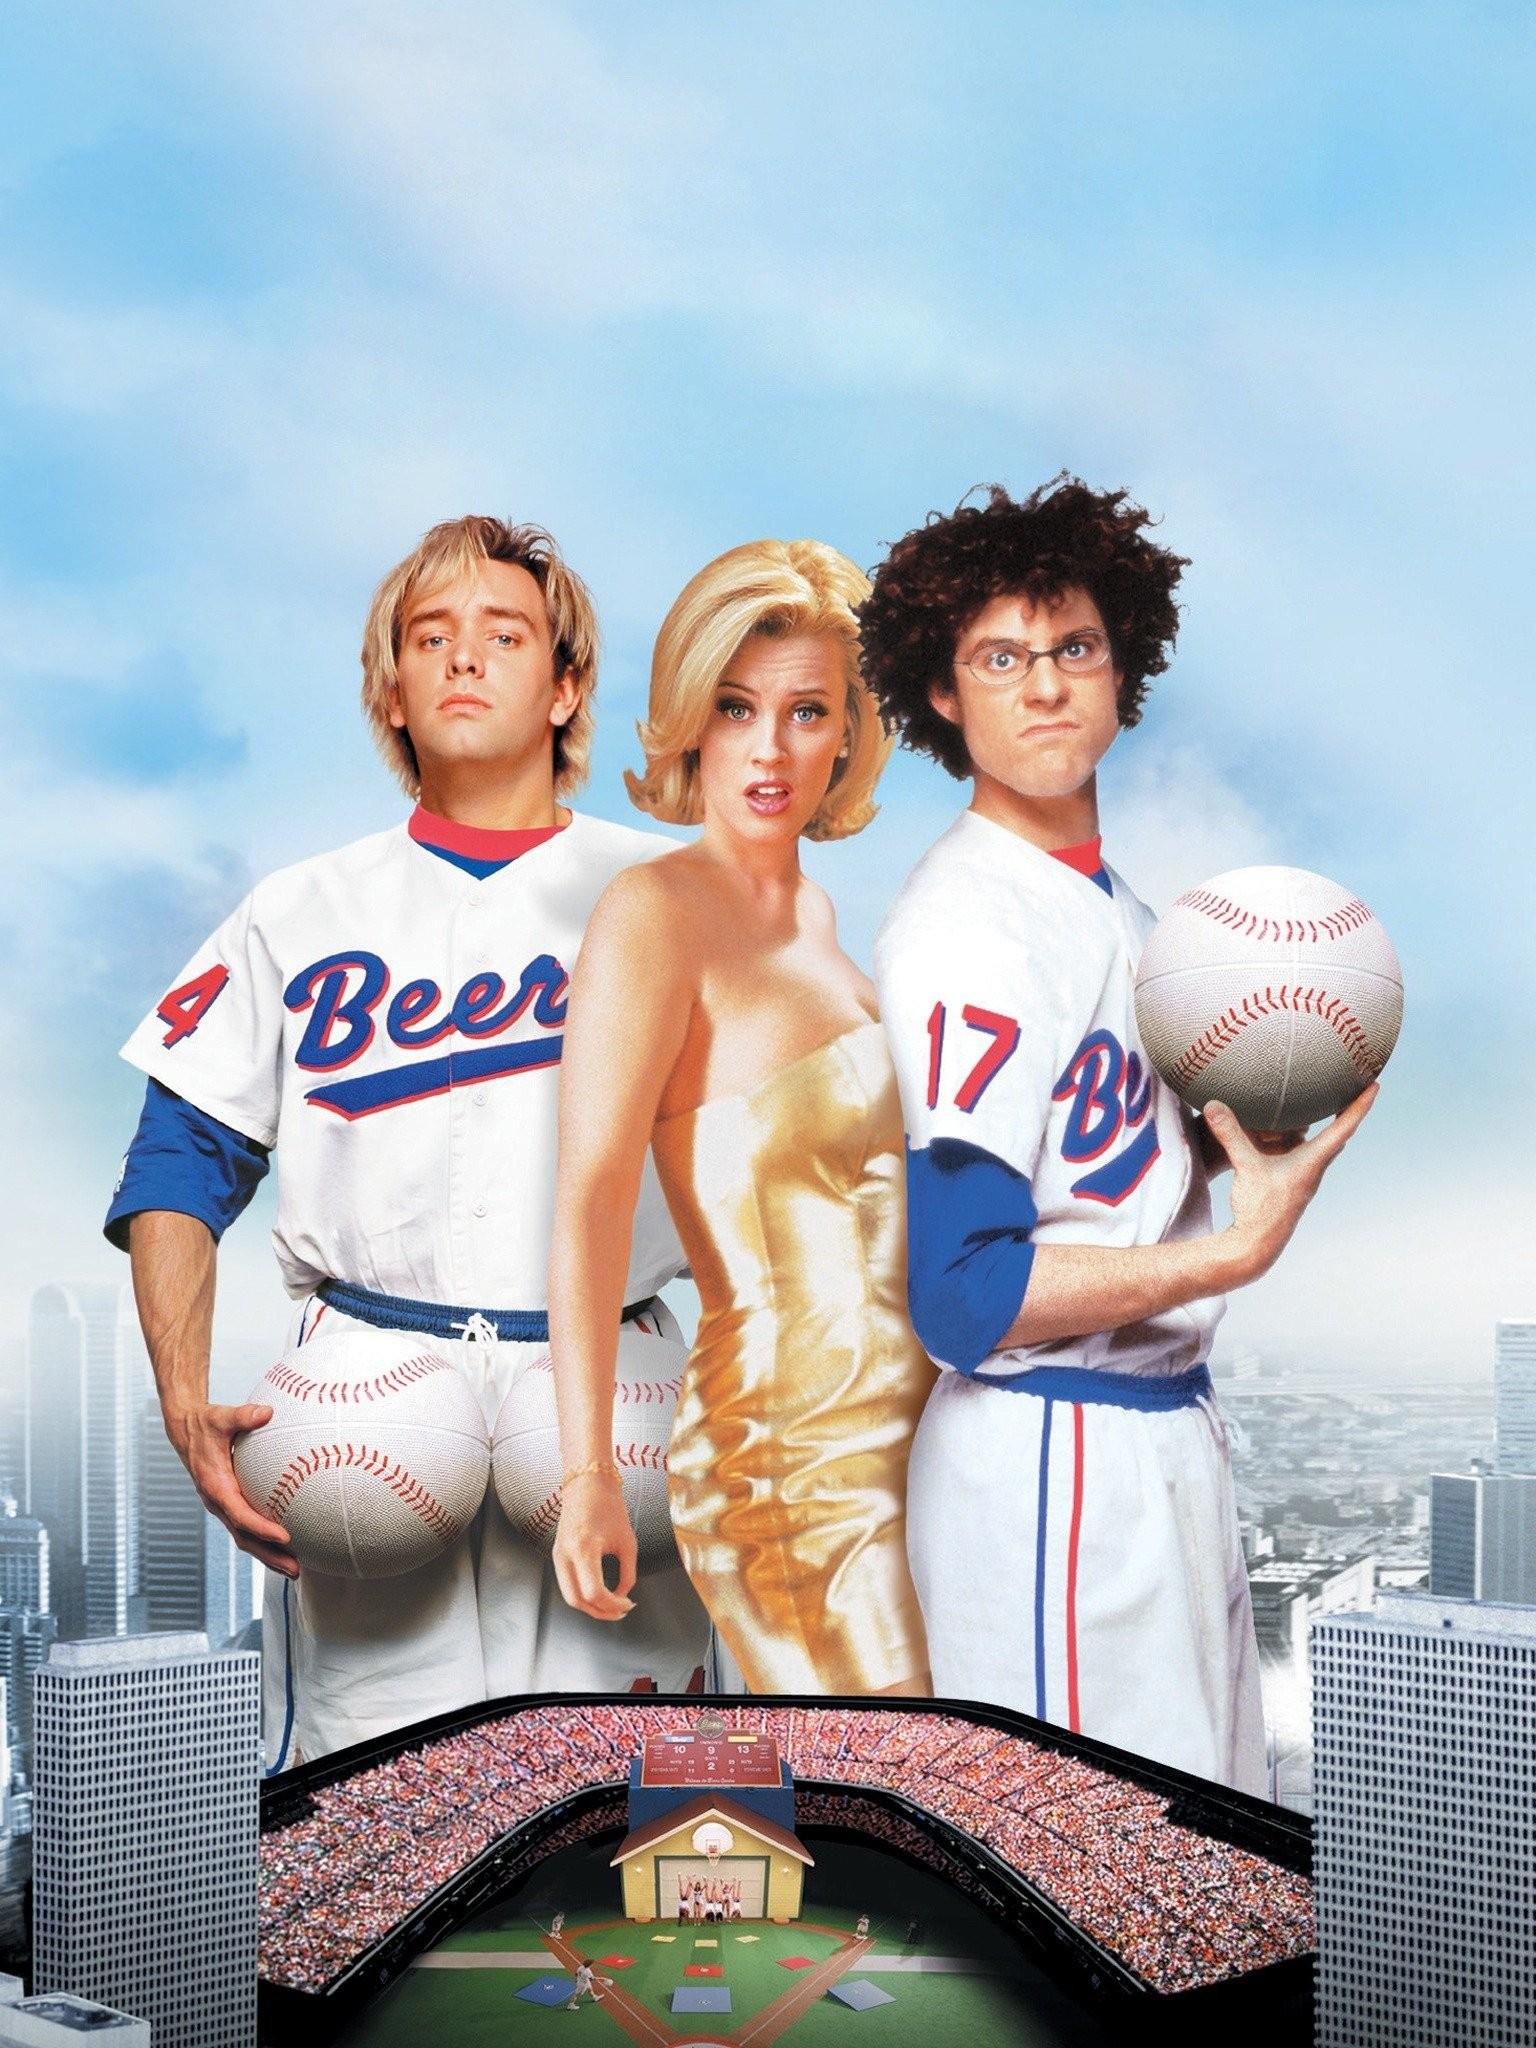 BASEketball | Where to watch streaming and online in Australia | Flicks